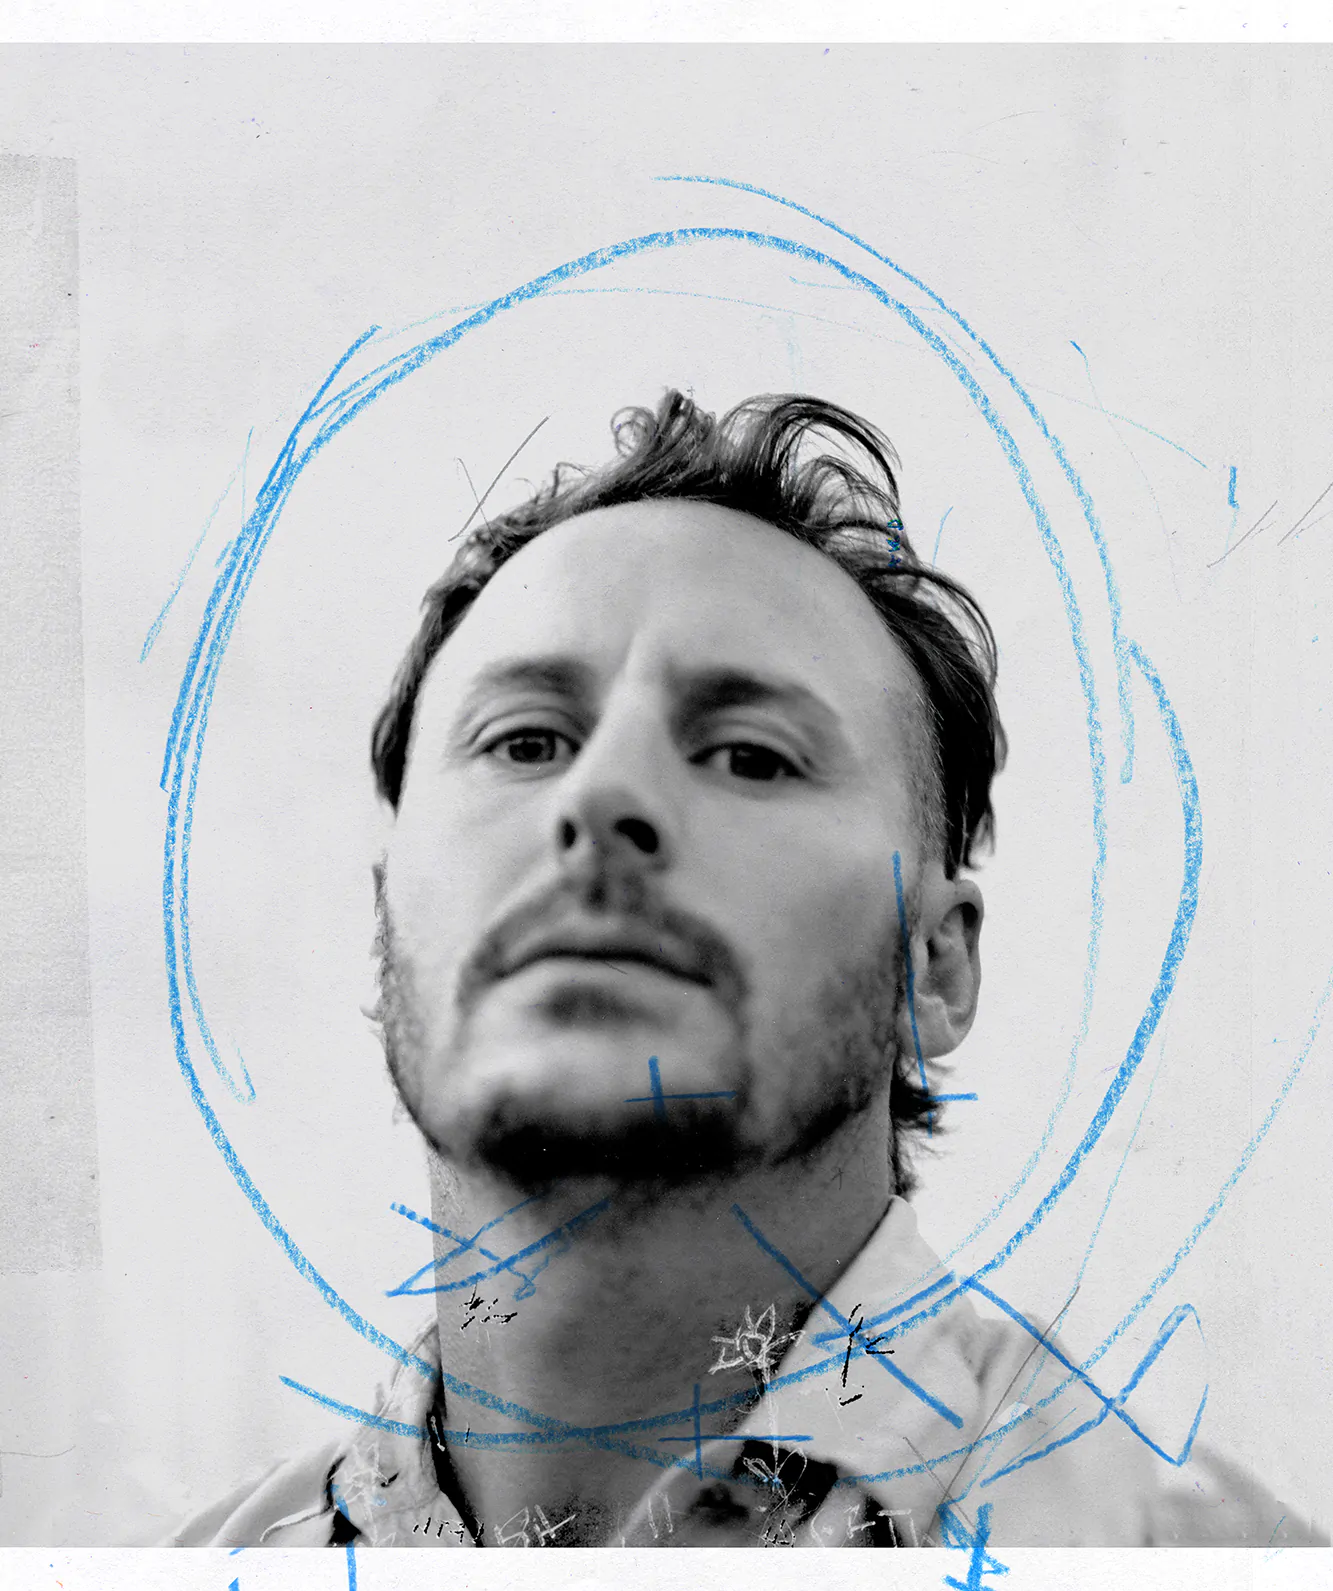 BEN HOWARD announces global transmission from Goonhilly Satellite Earth Station on 8th April